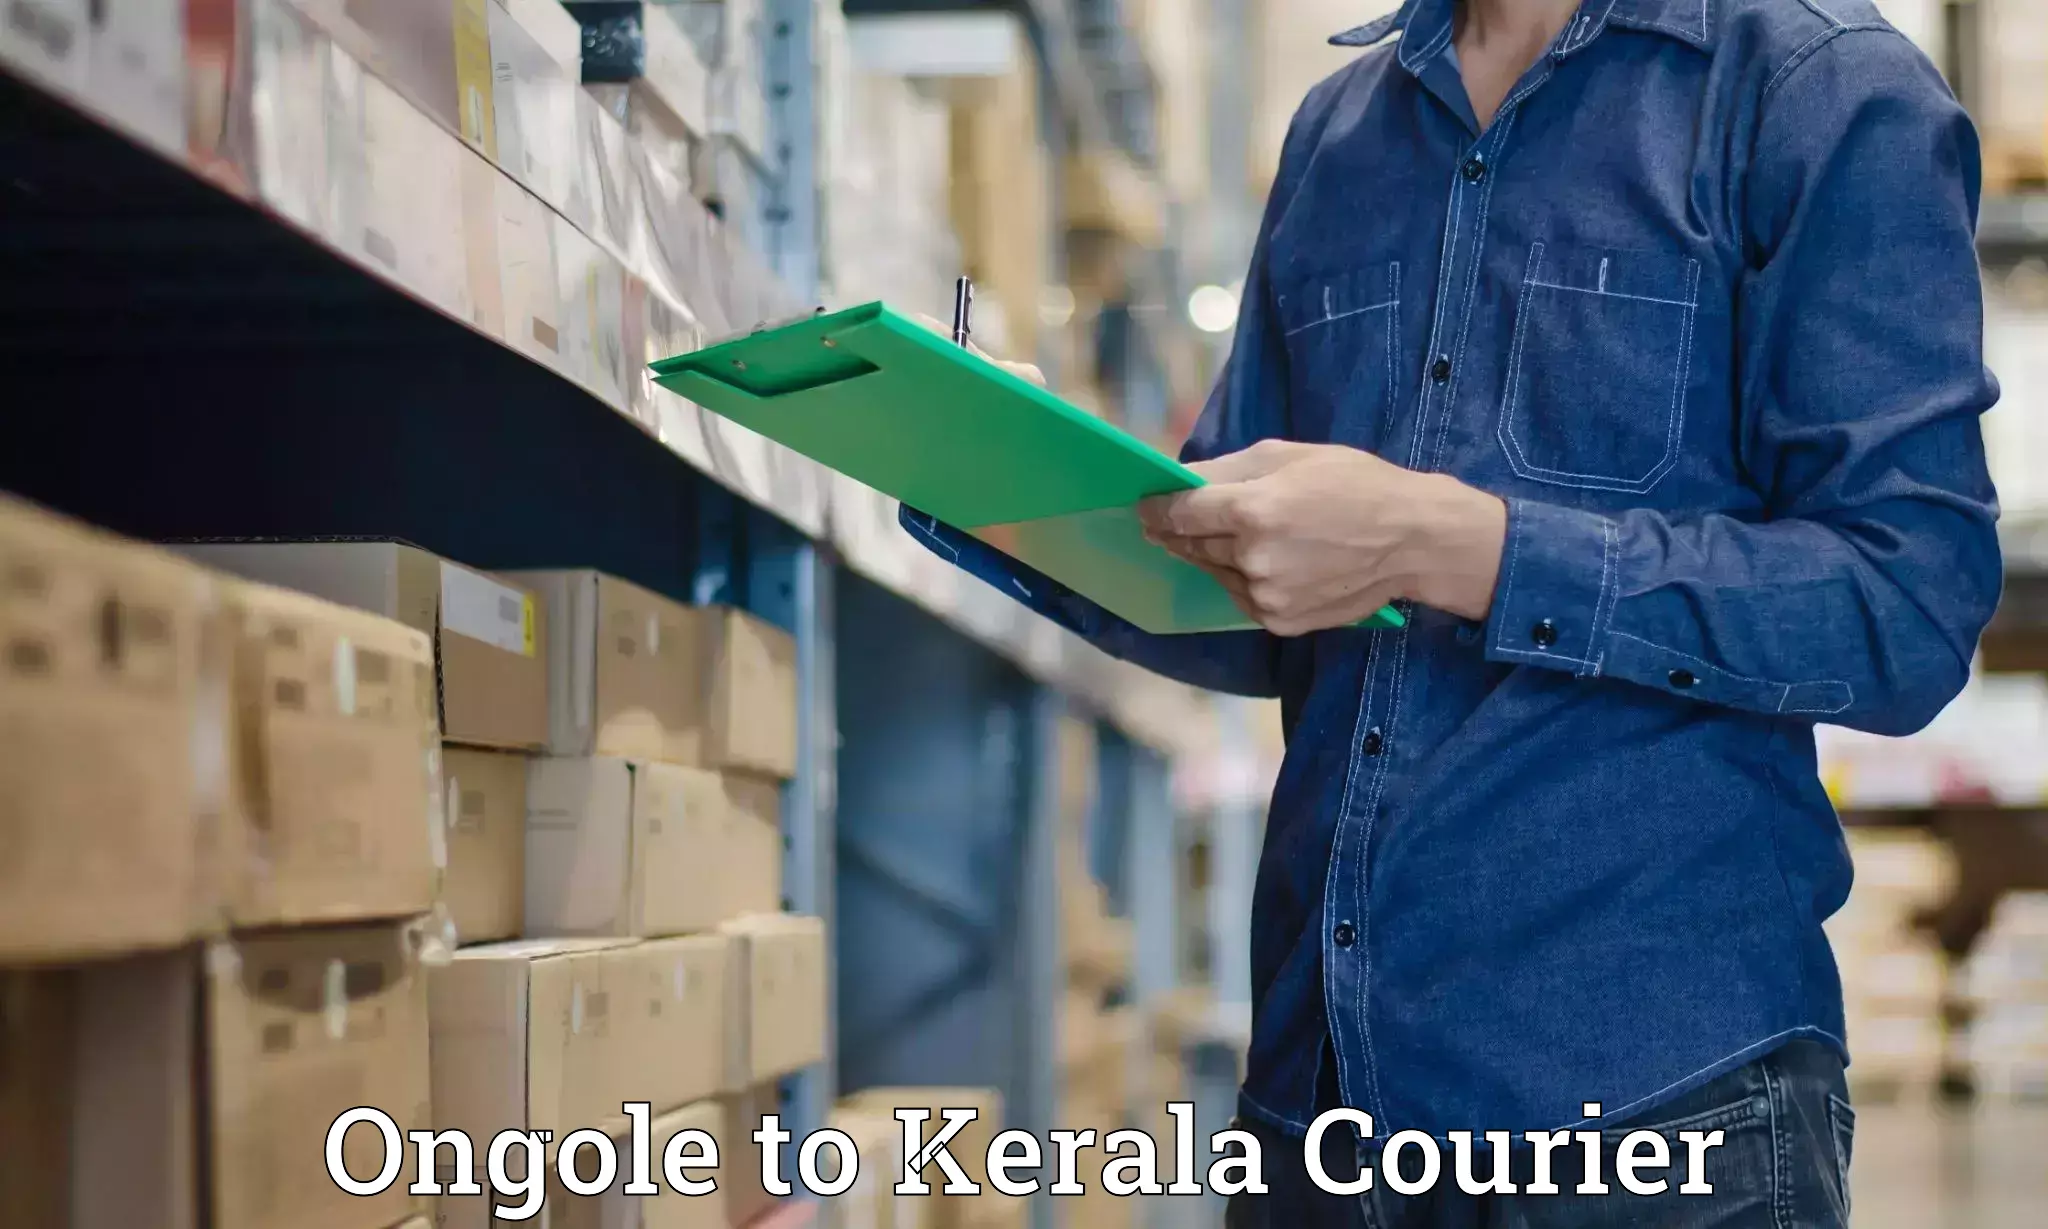 High-speed parcel service Ongole to Kerala